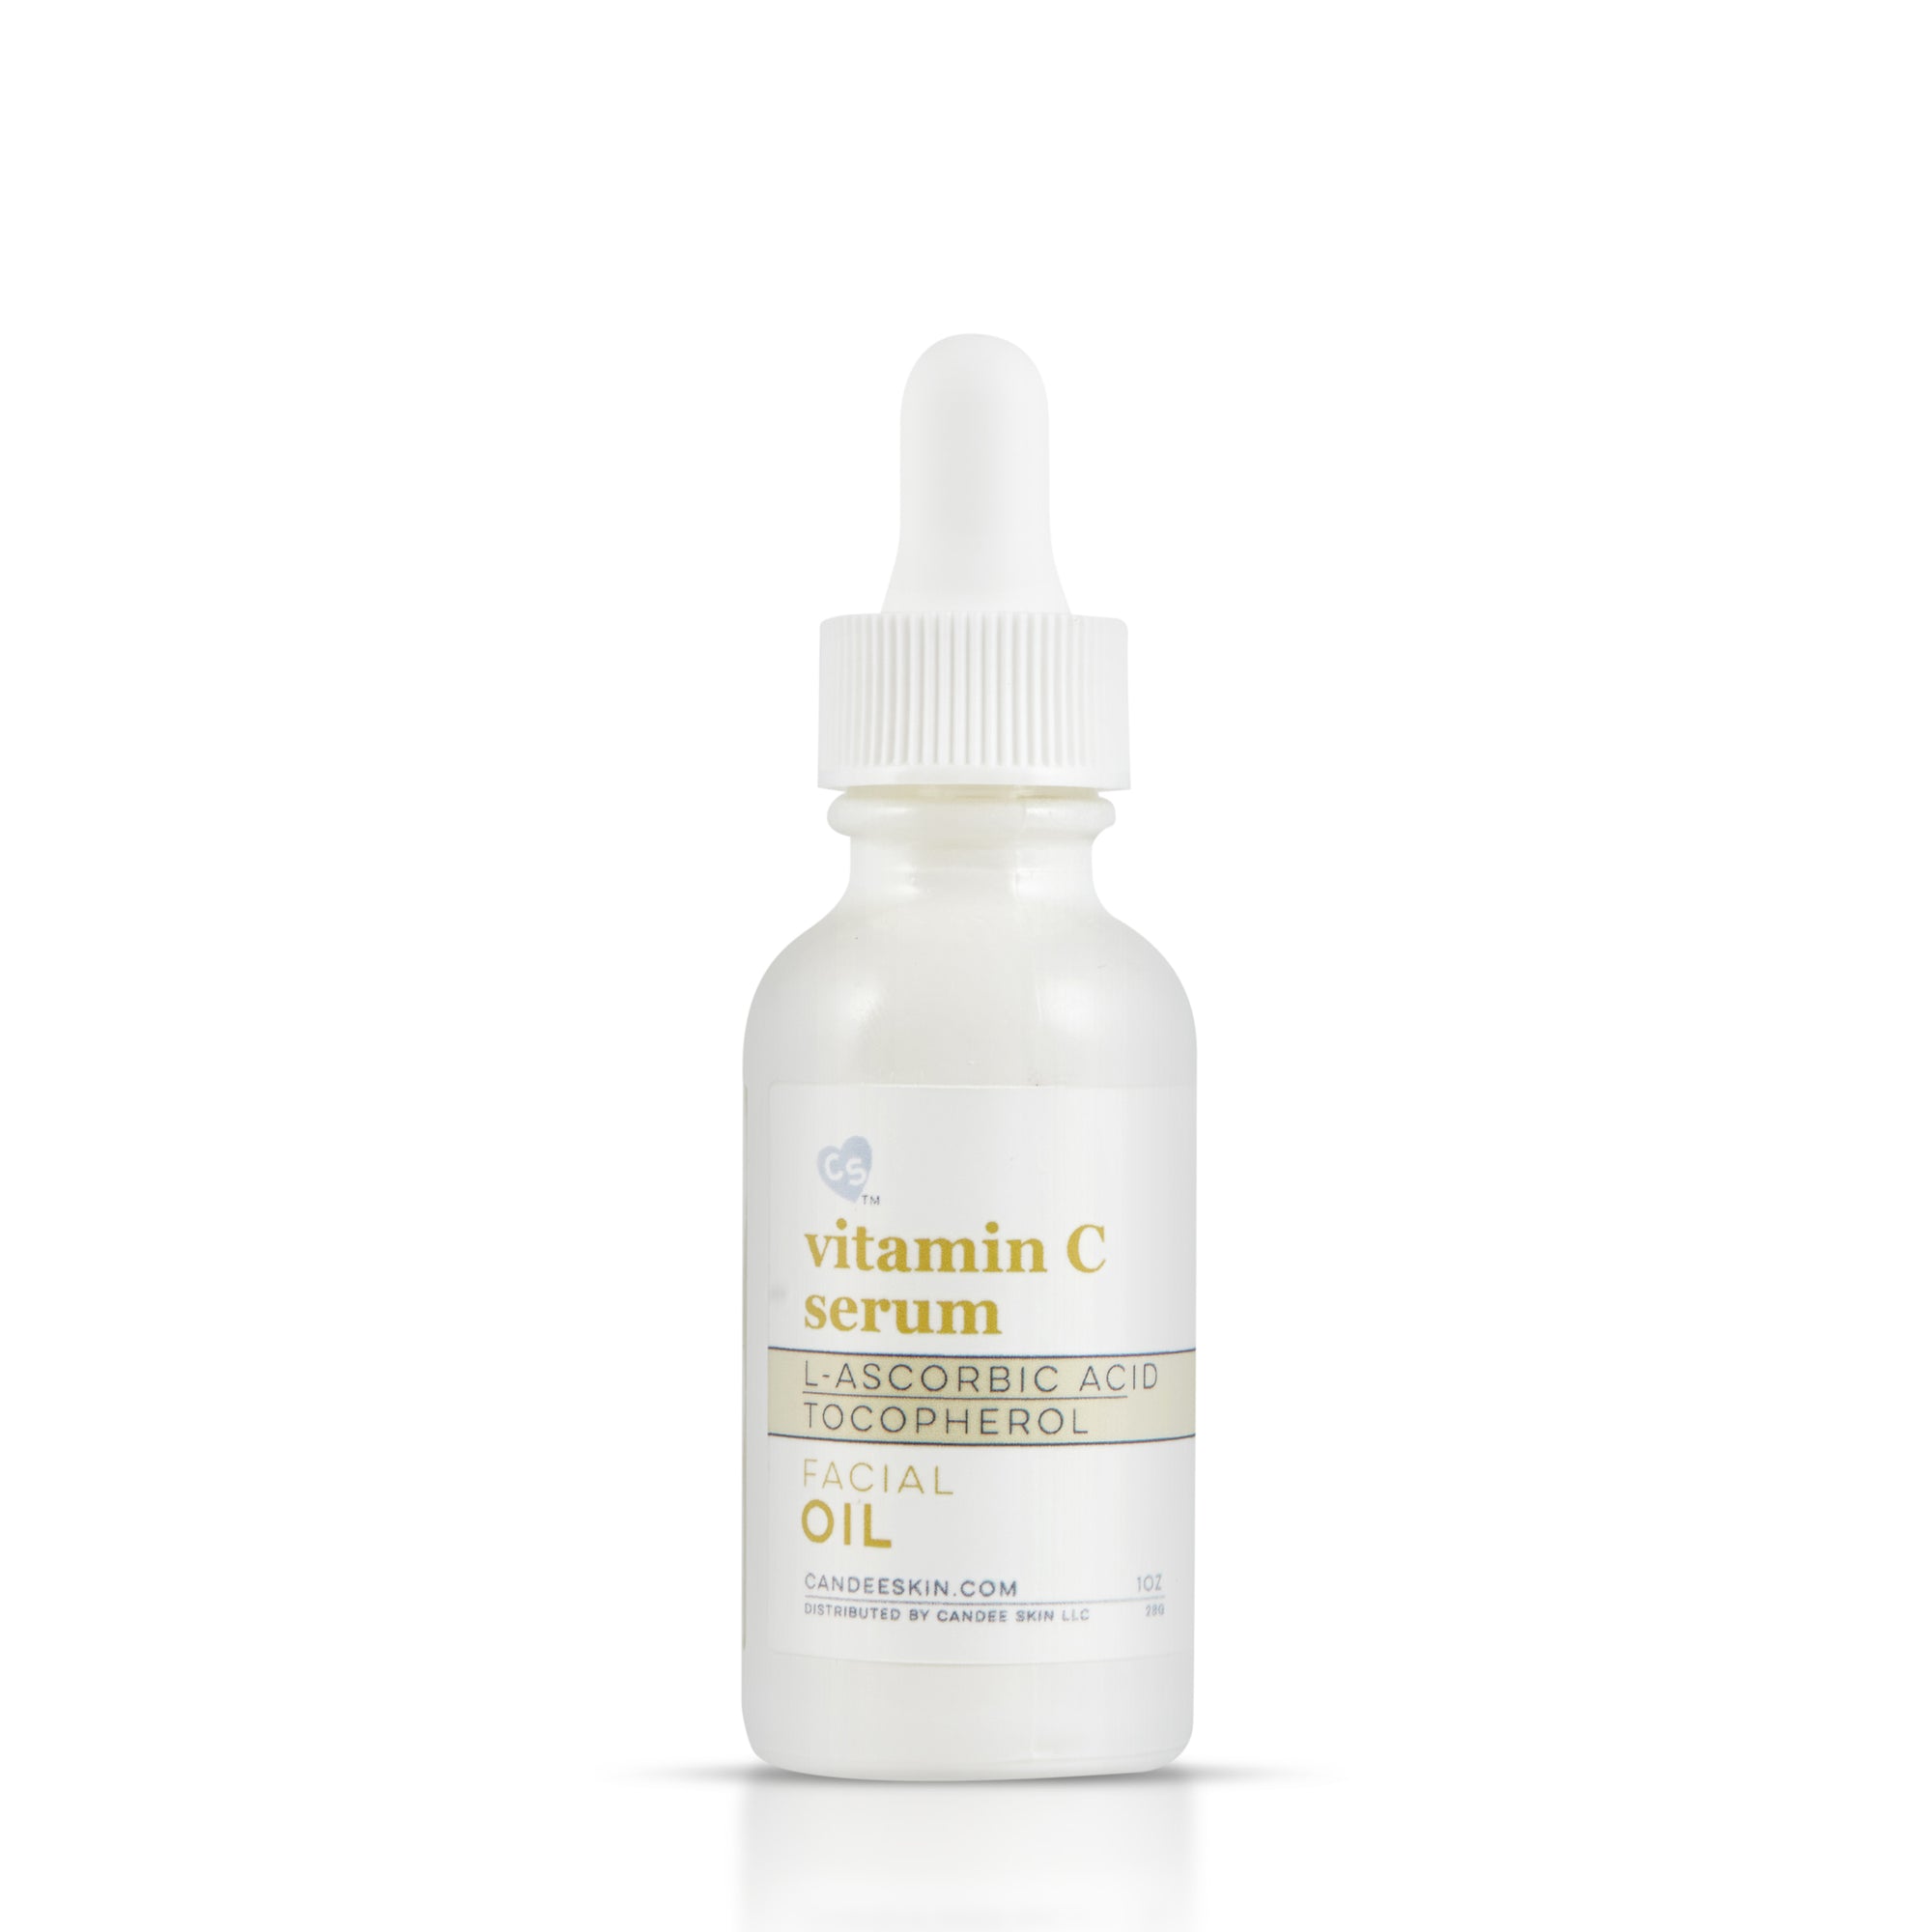 Vitamin C/ Tocopherol Serum Facial Oil. Candee Skin Products. Skin Care Science Simplified.